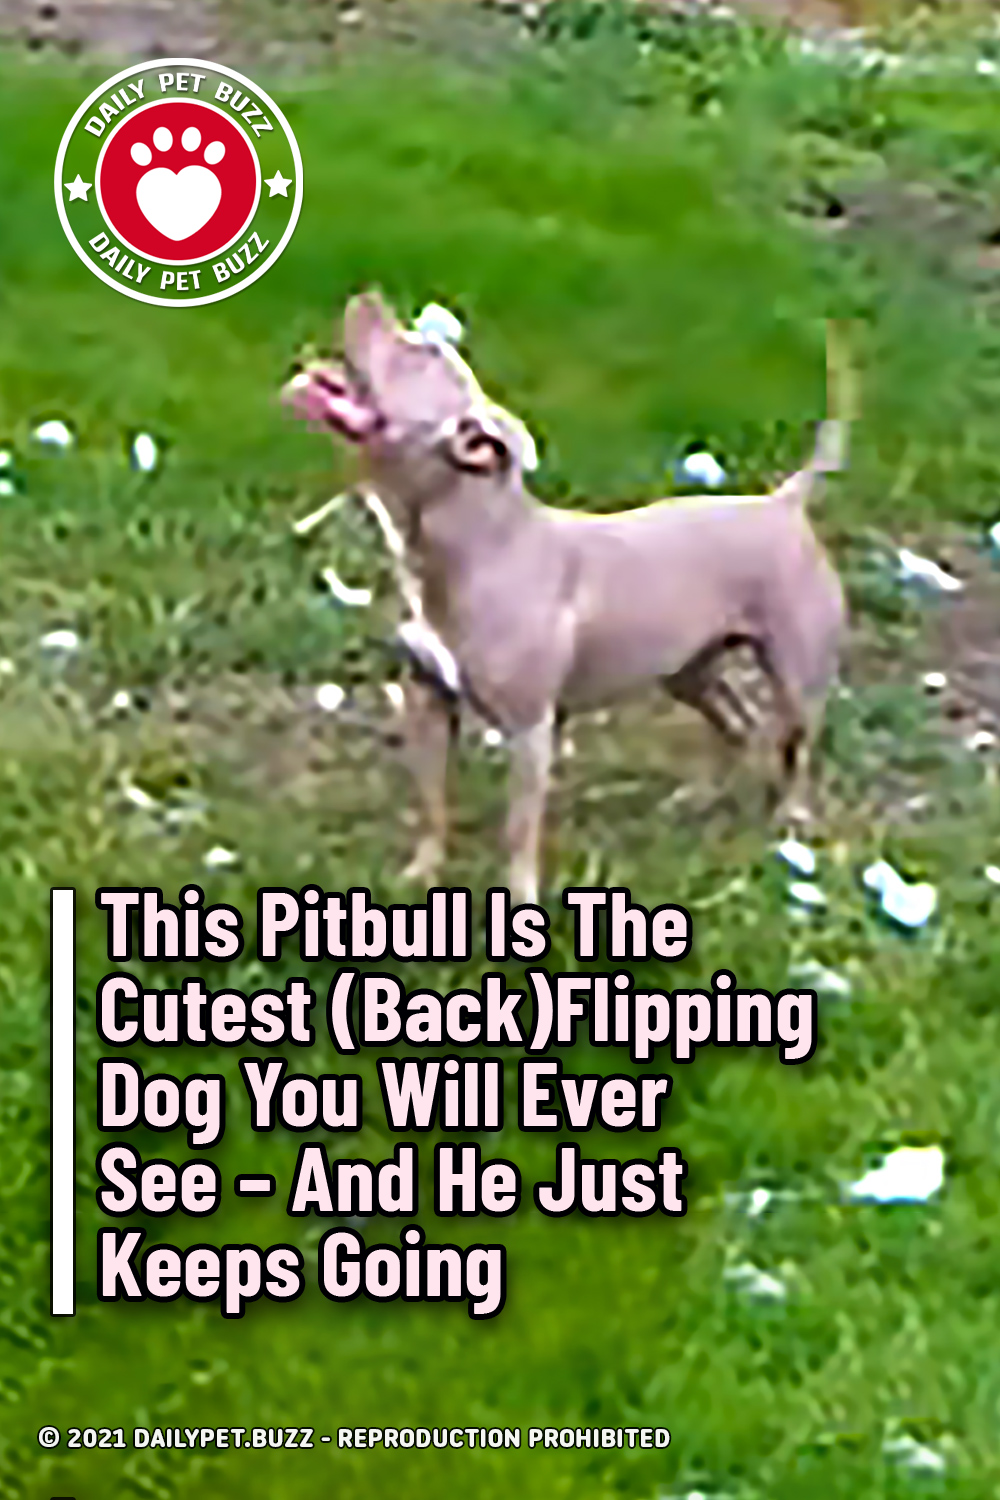 This Pitbull Is The Cutest (Back)Flipping Dog You Will Ever See – And He Just Keeps Going